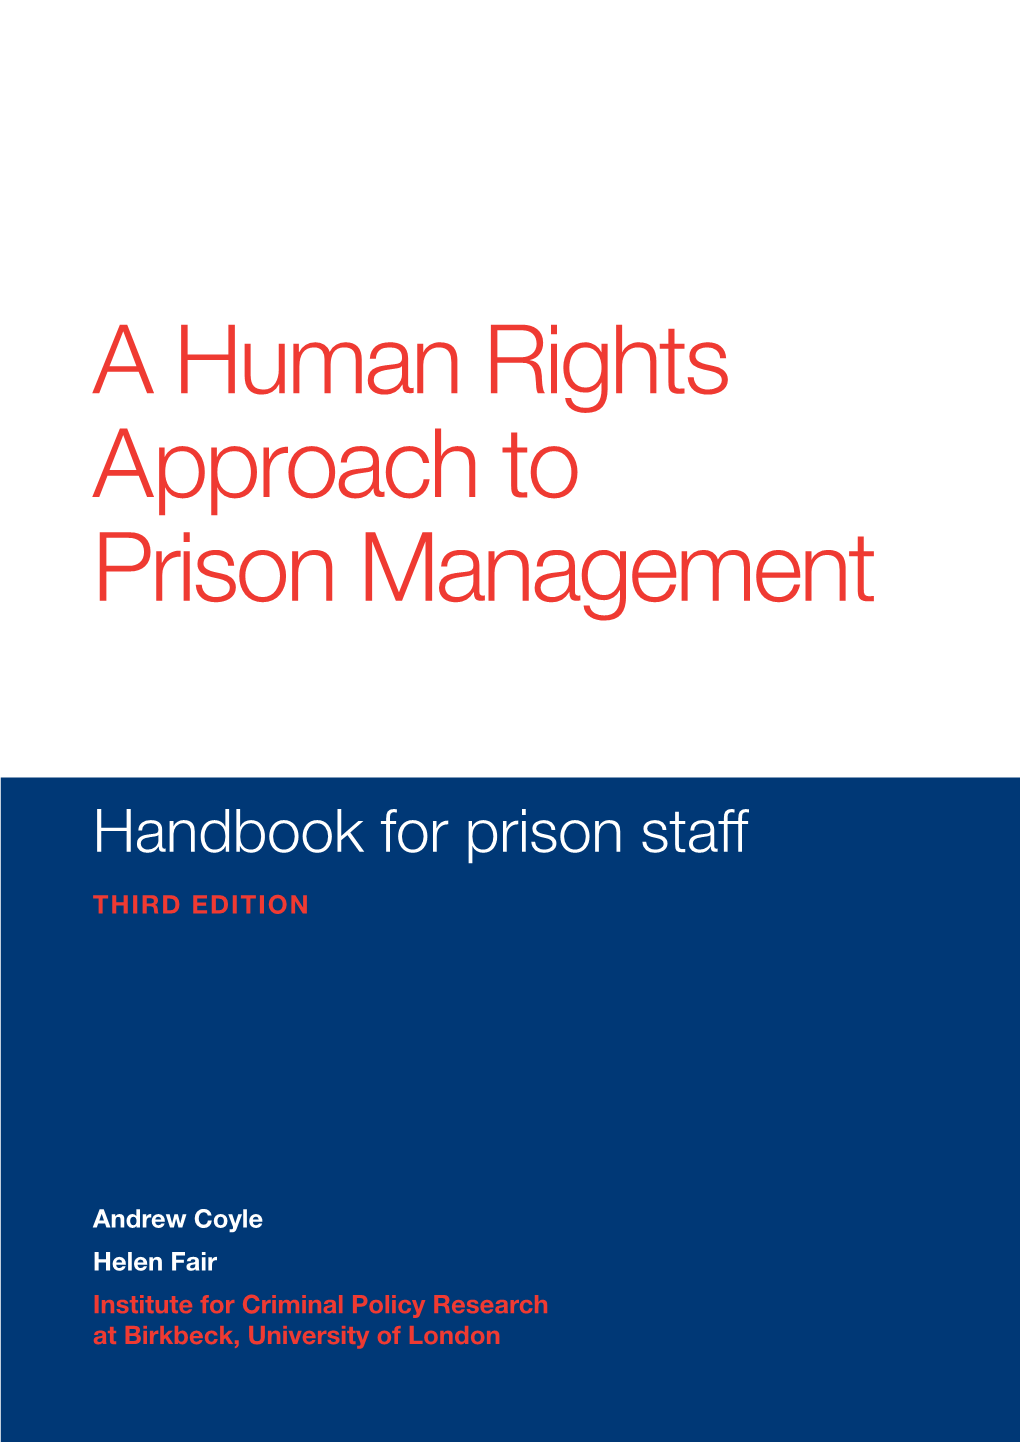 A Human Rights Approach to Prison Management